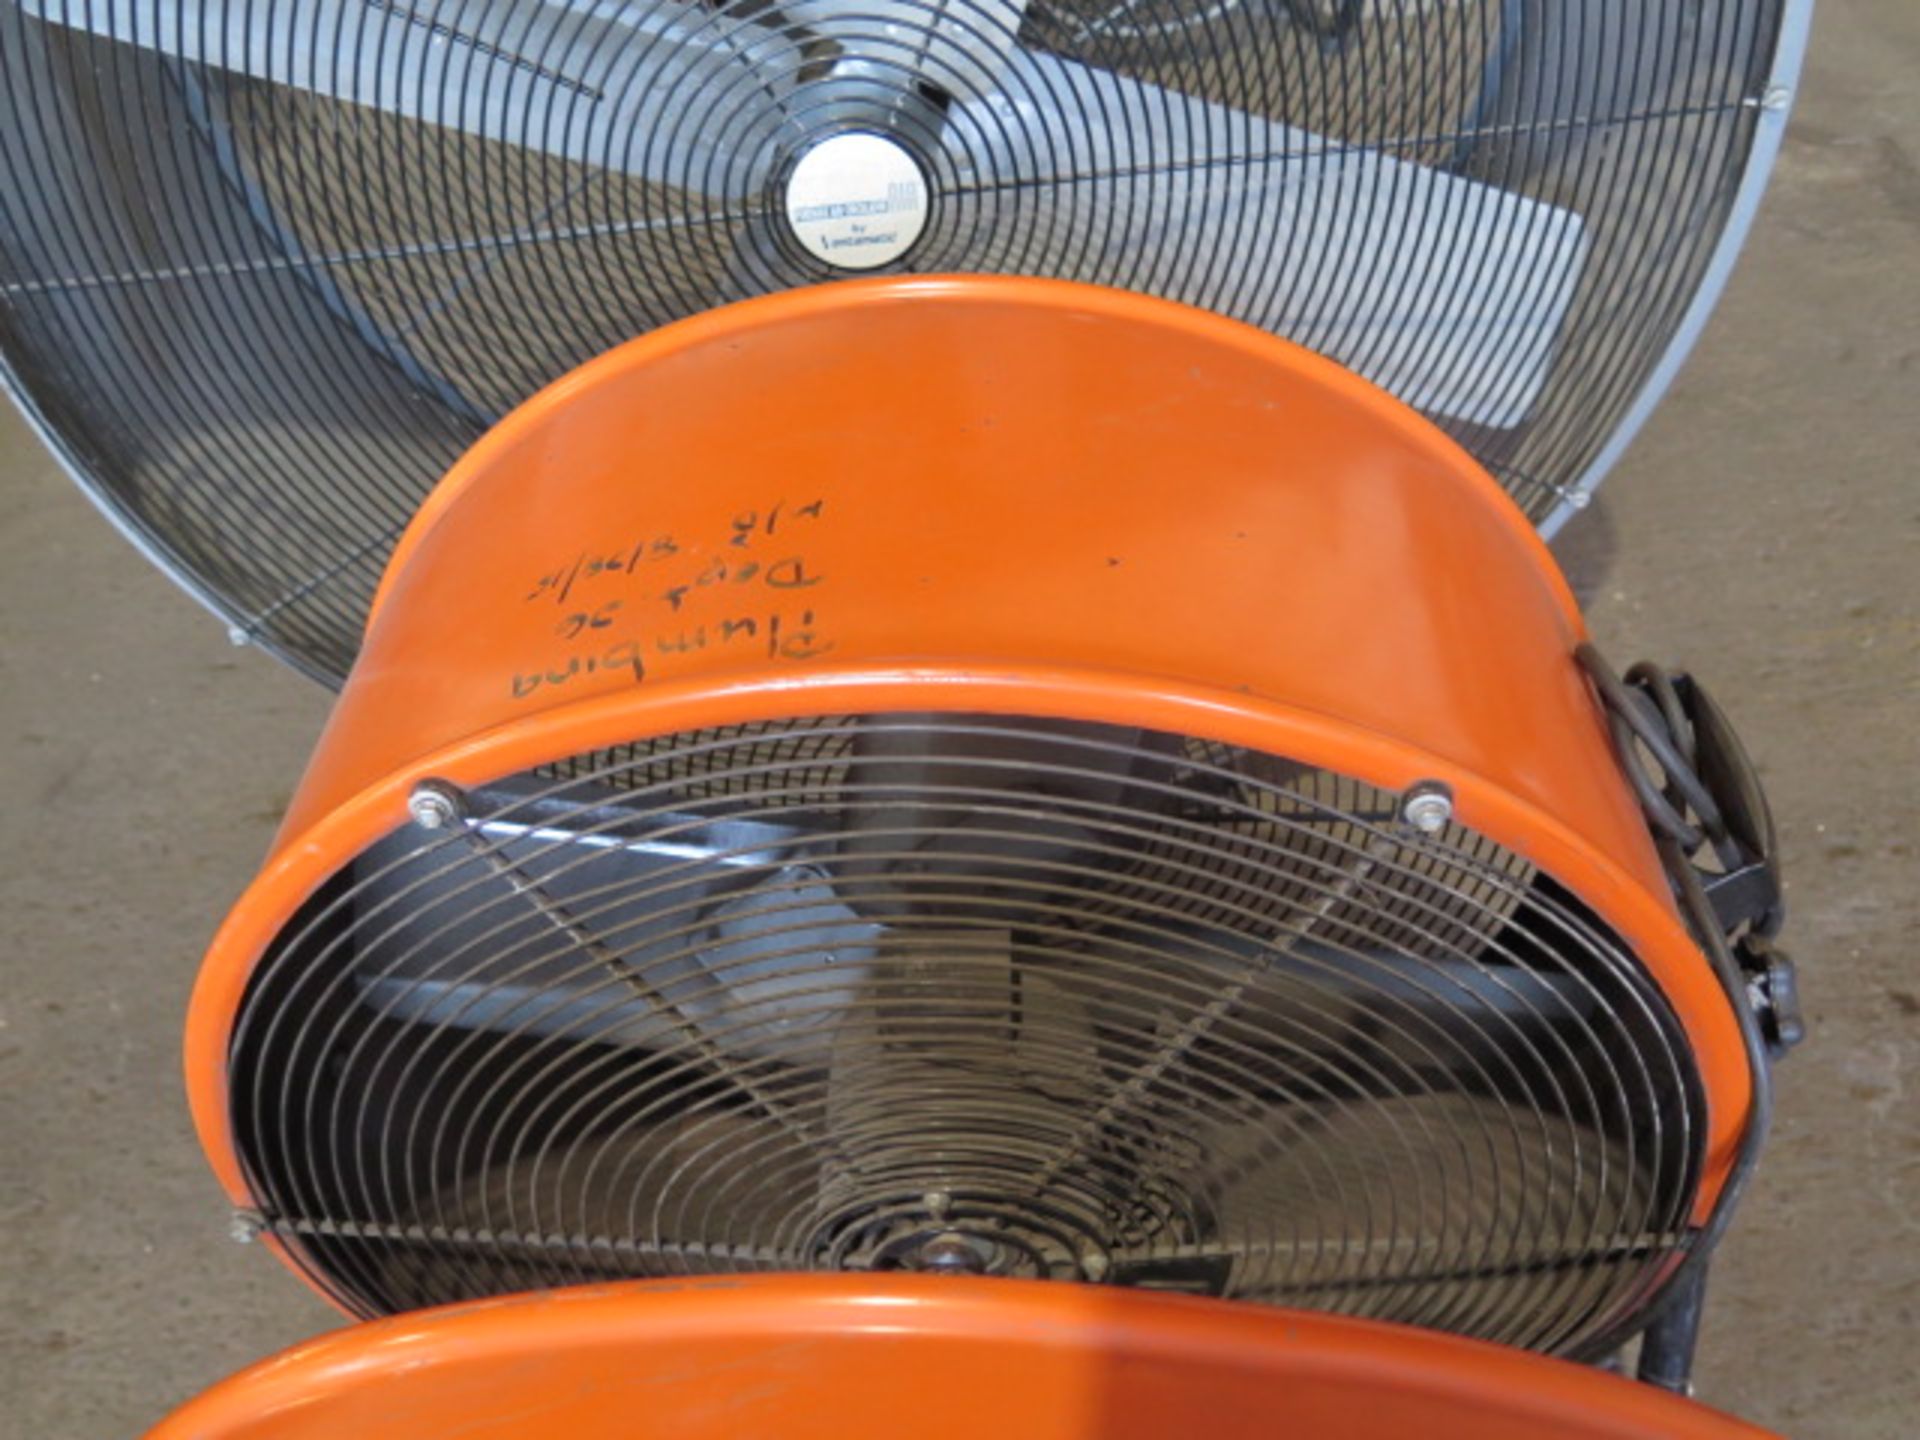 Shop Fans (3) (SOLD AS-IS - NO WARRANTY) - Image 4 of 6